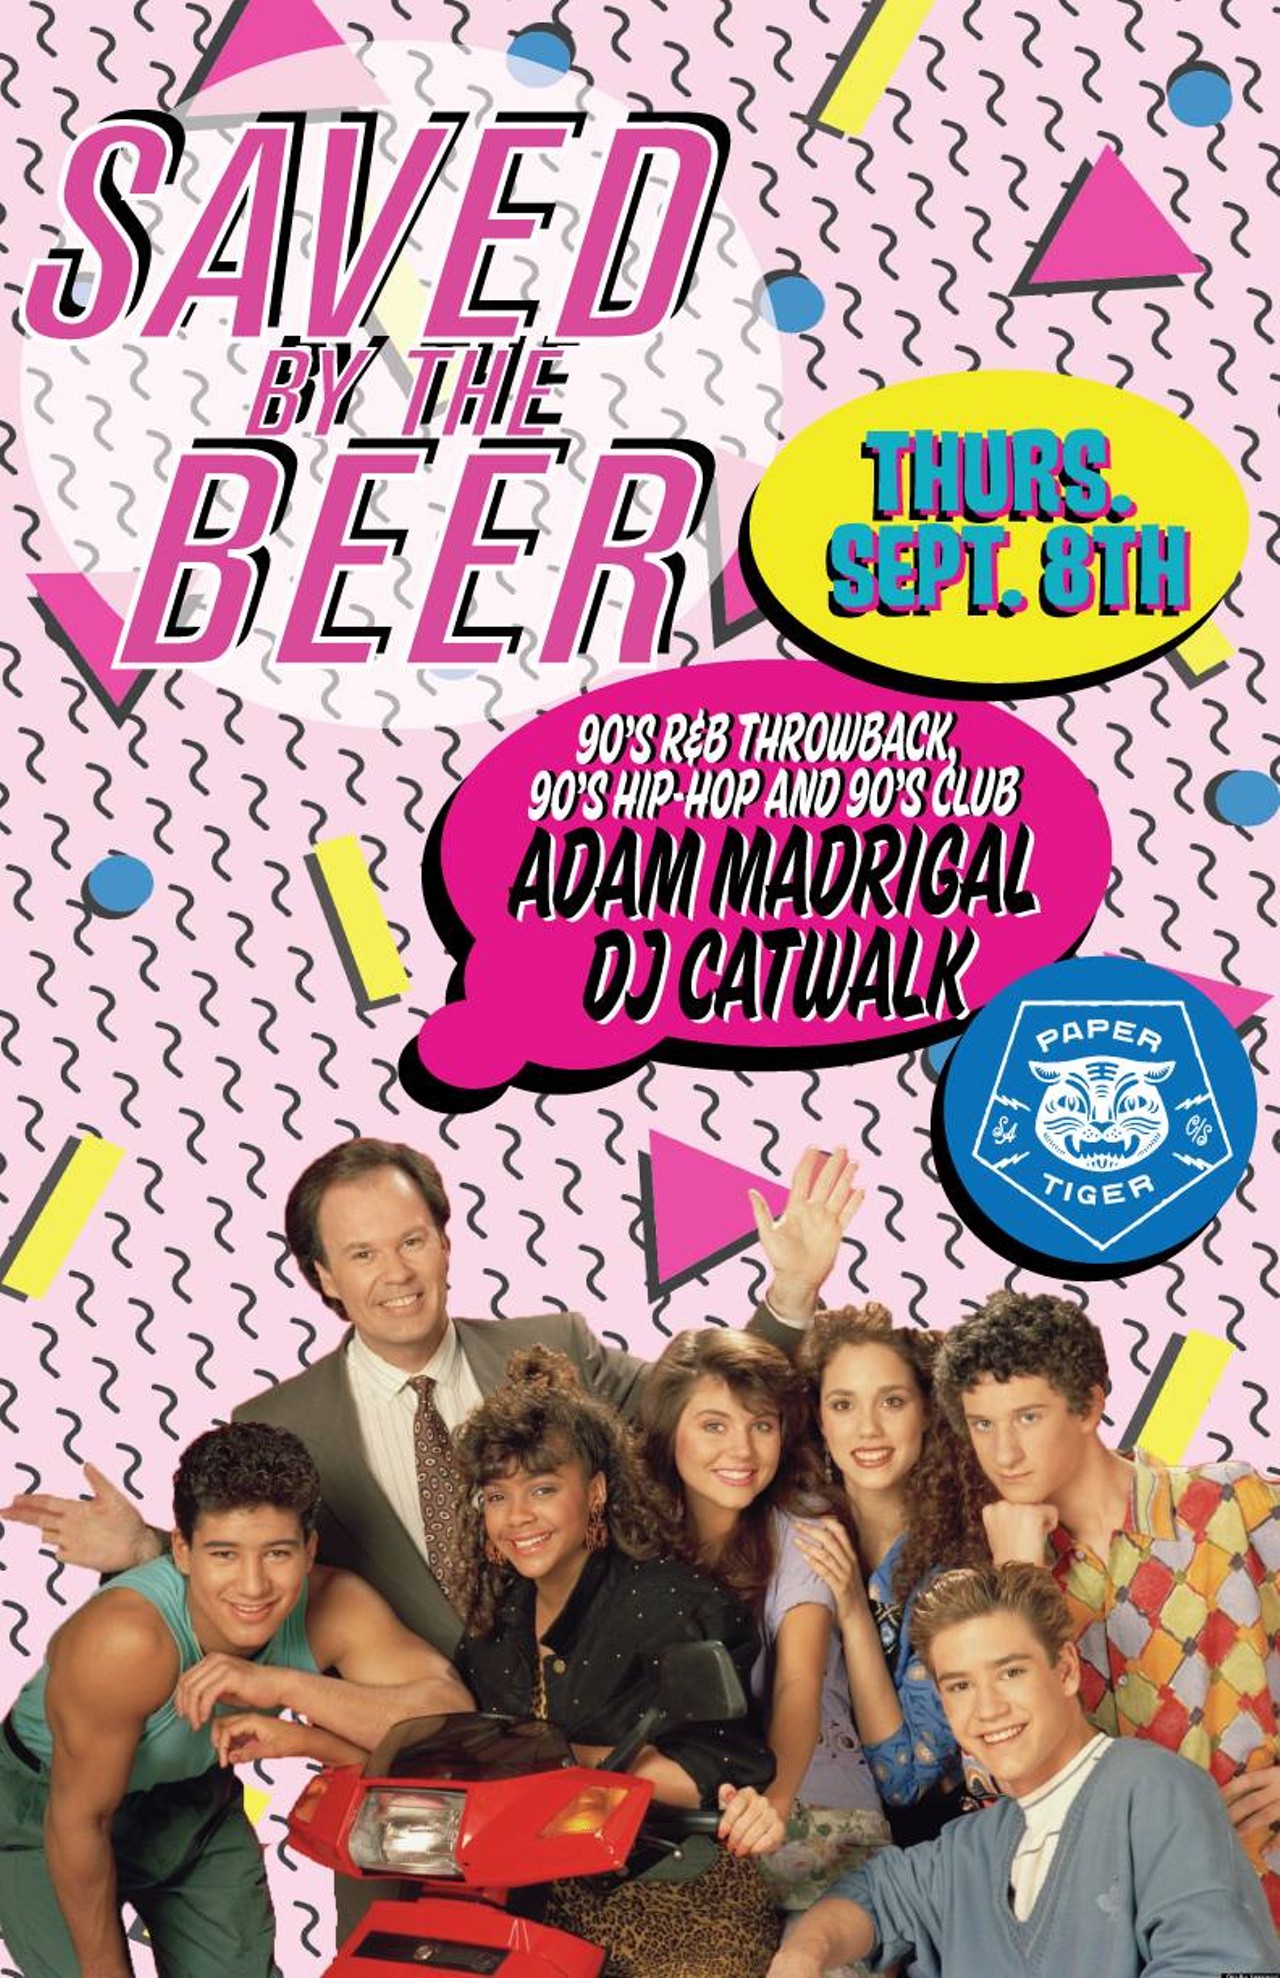 Saved by the Beer!
10 p.m. Thur. Sept. 8 at Paper Tiger, 2410 N. St. Mary&#146;s St.
&#145;90s R&B, hip hop and club throwbacks by Adam Madrigal & DJ Chacho. Free. For more info, papertigersa.com
Photo via Facebook,  Paper Tiger